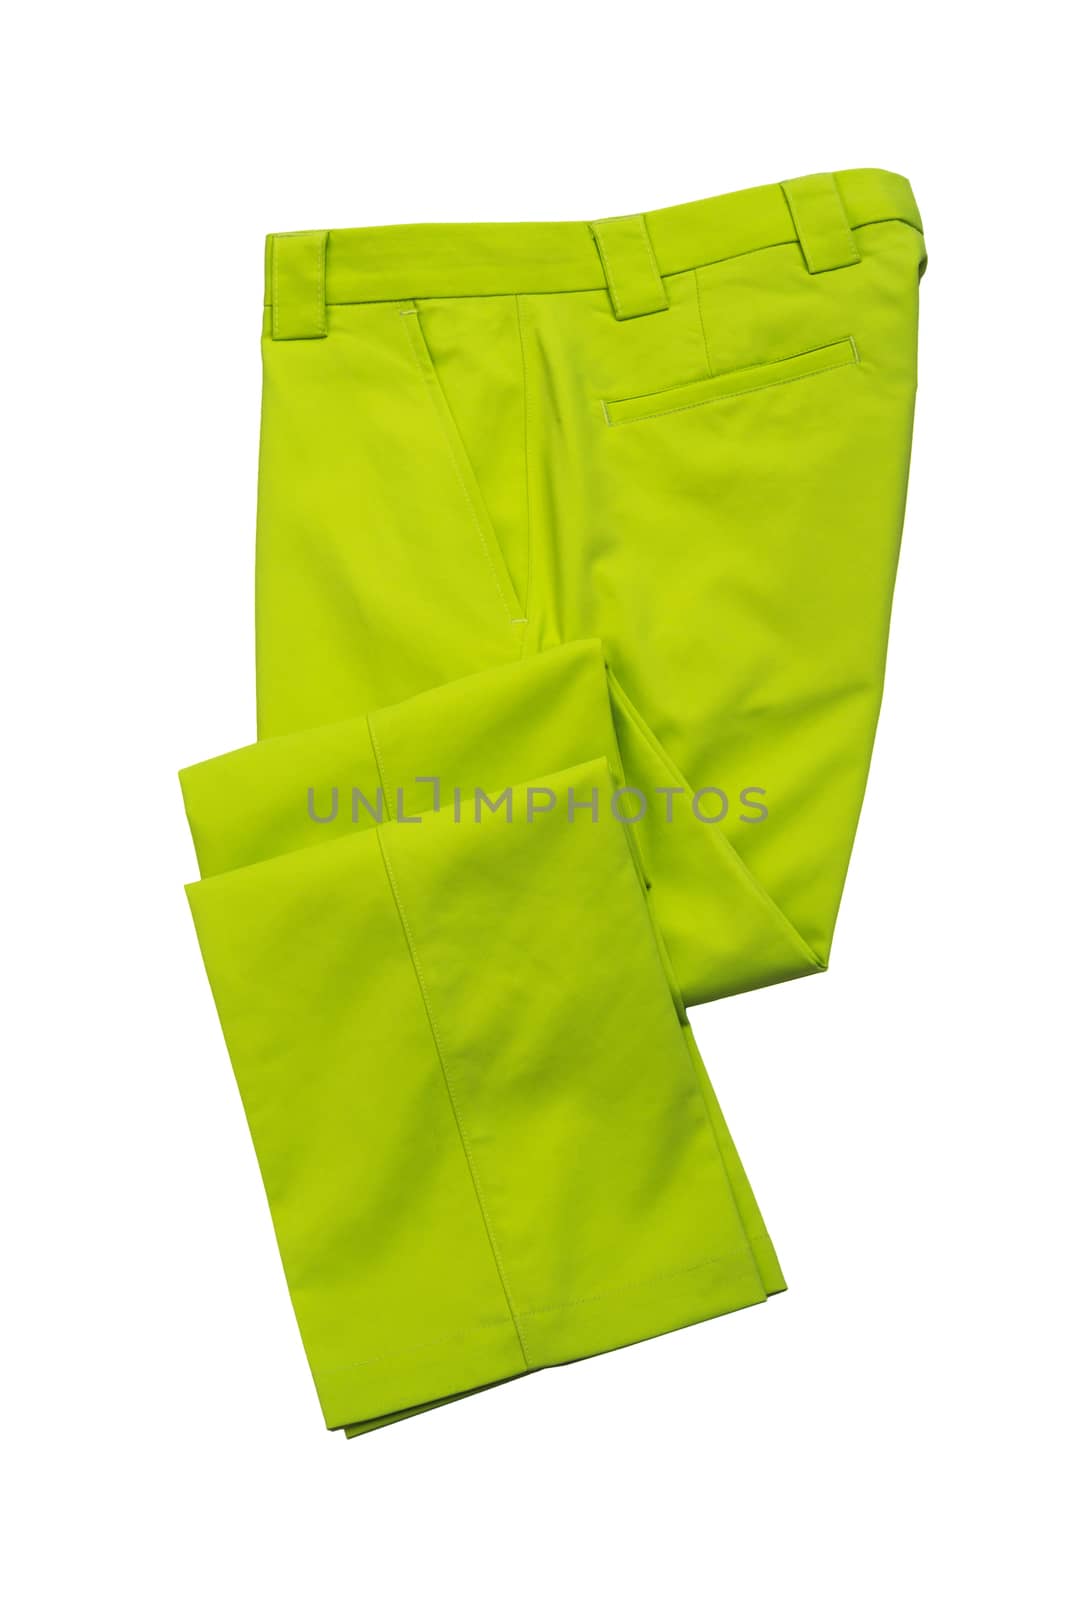 Green pants, trousers for man on white background